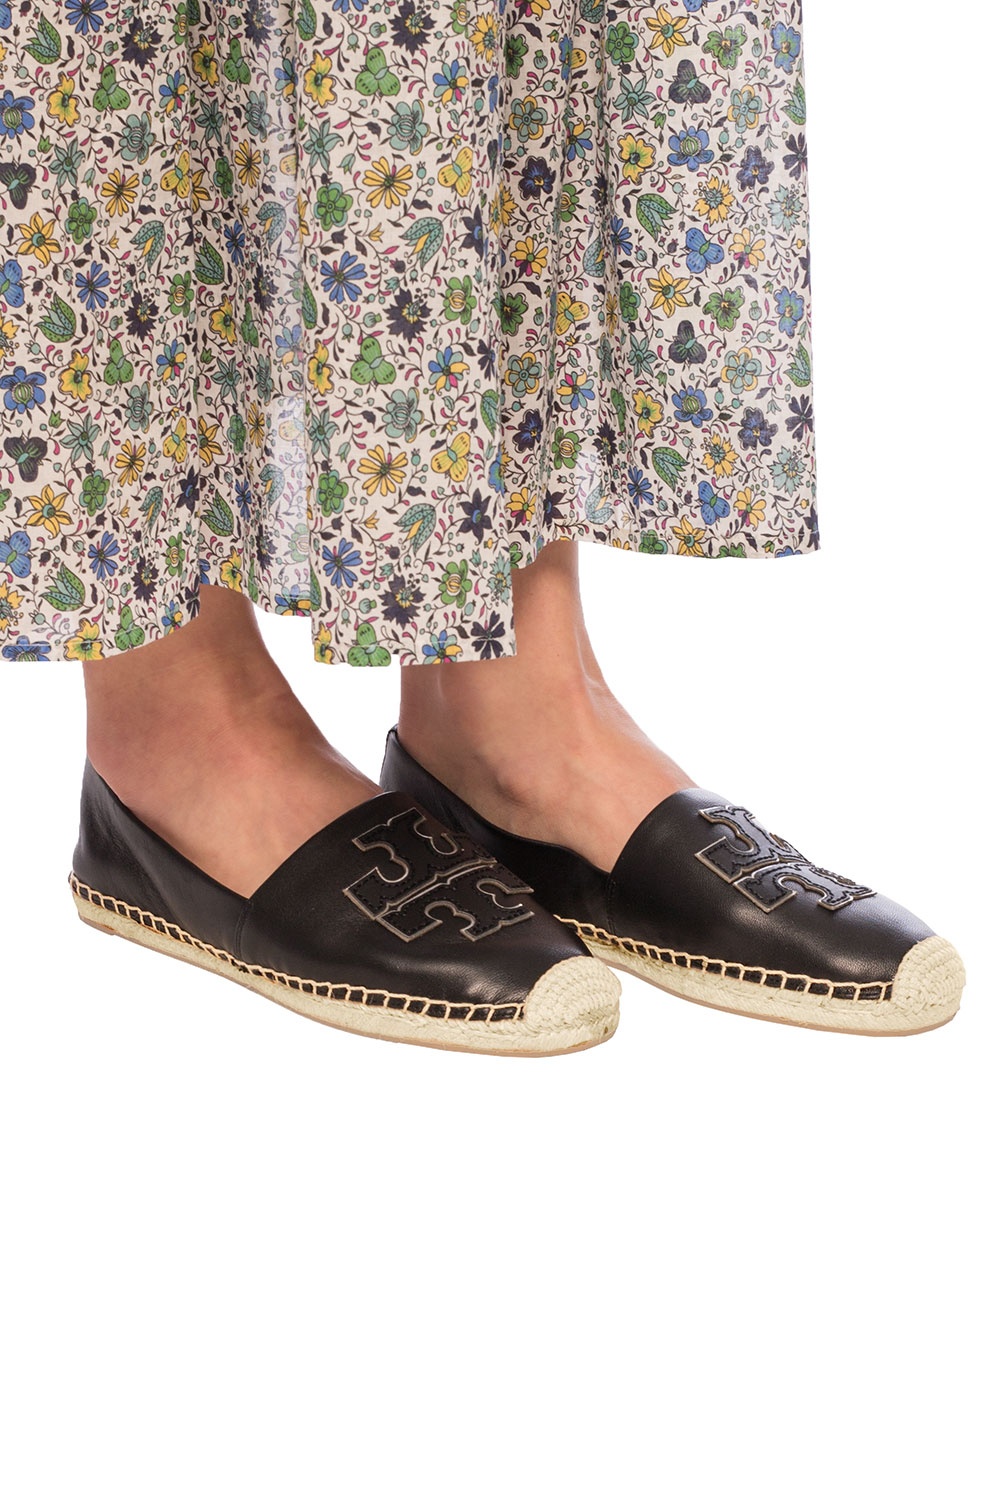 Women's Shoes | top sneakers | and or running on an injury - Tory Burch  Balenciaga Runner low - IetpShops